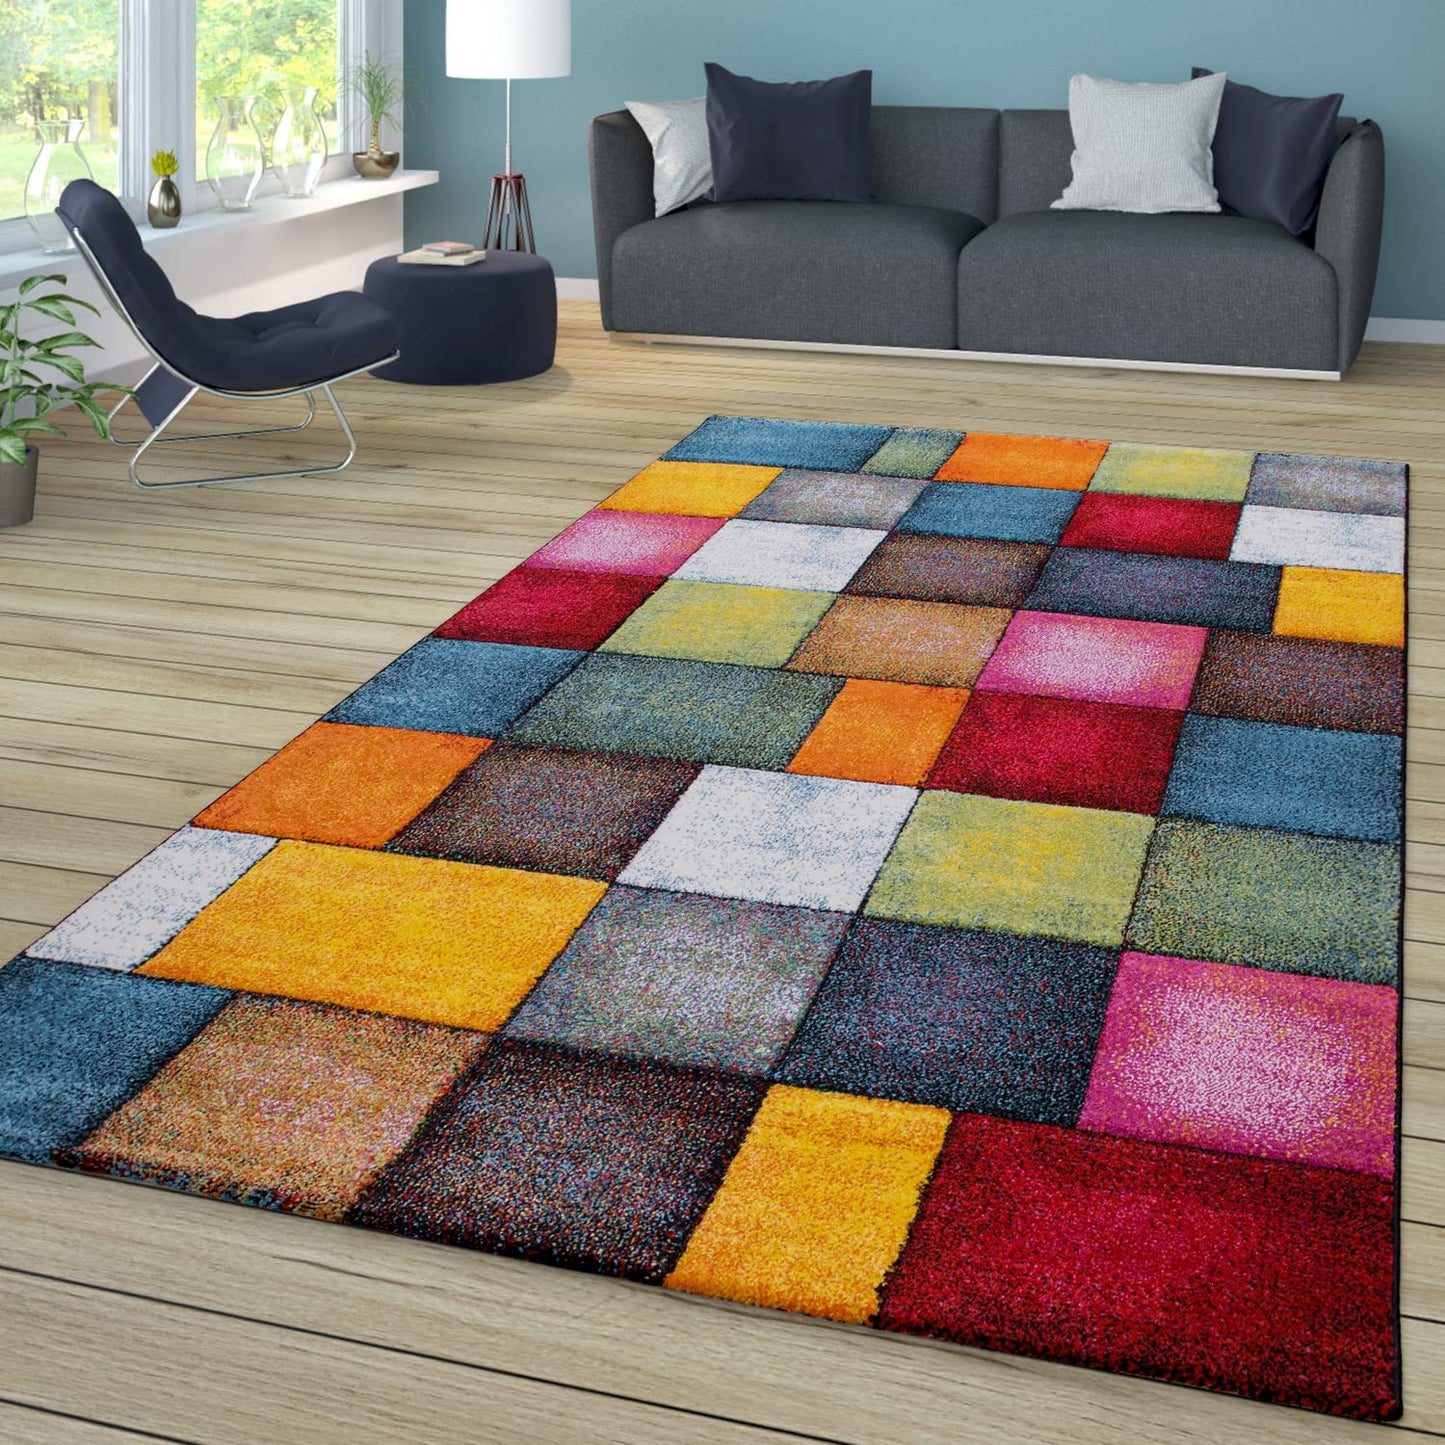 Living Room Rug Check Design with Squares Multicolor